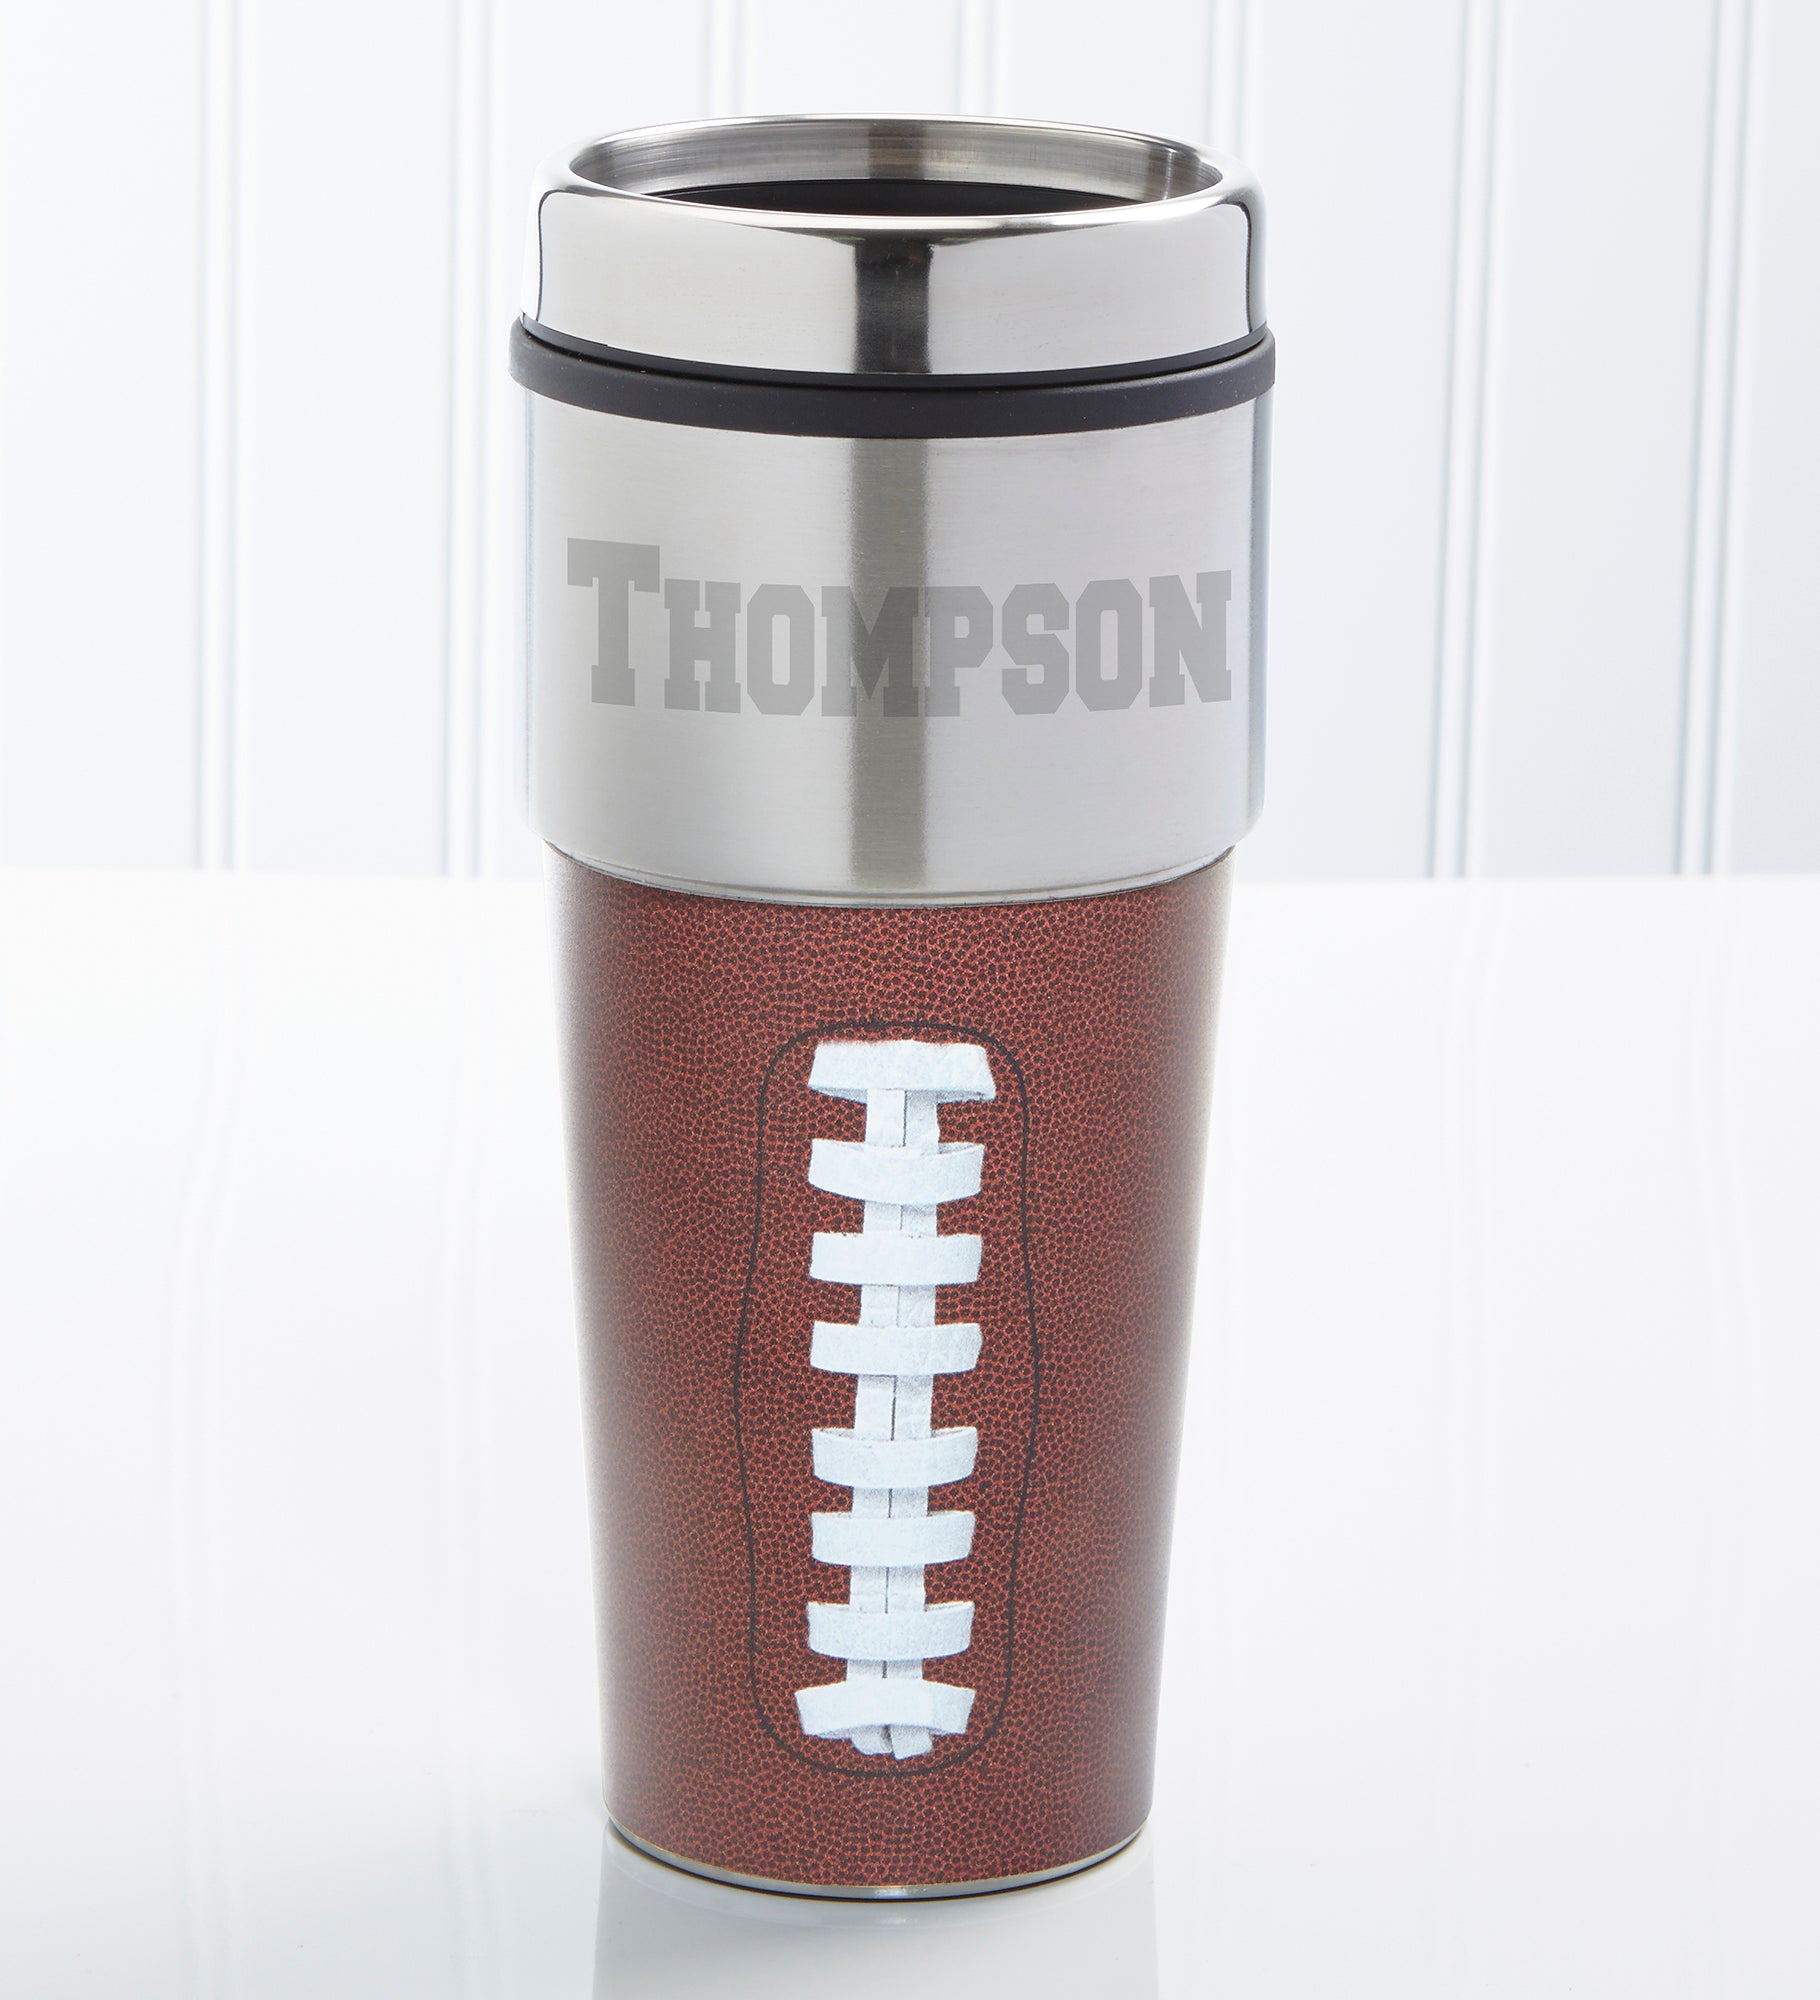 Touch Down! Personalized Travel Mug